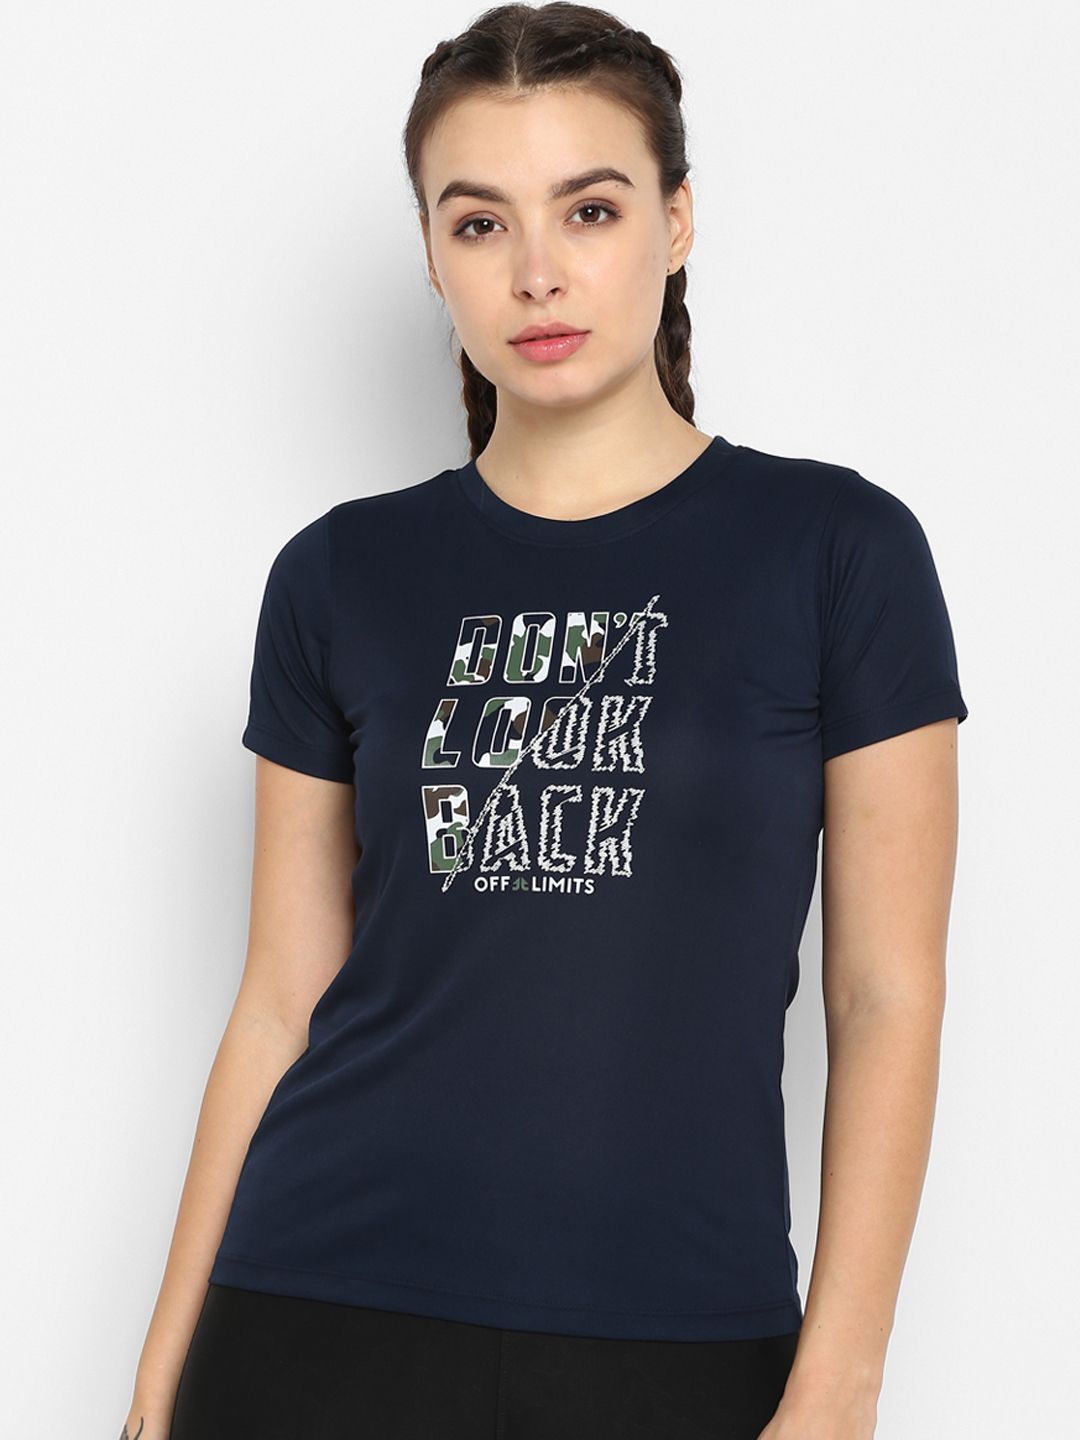 OFF LIMITS Women Navy Blue Printed Round Neck Slim Fit T-shirt Price in India